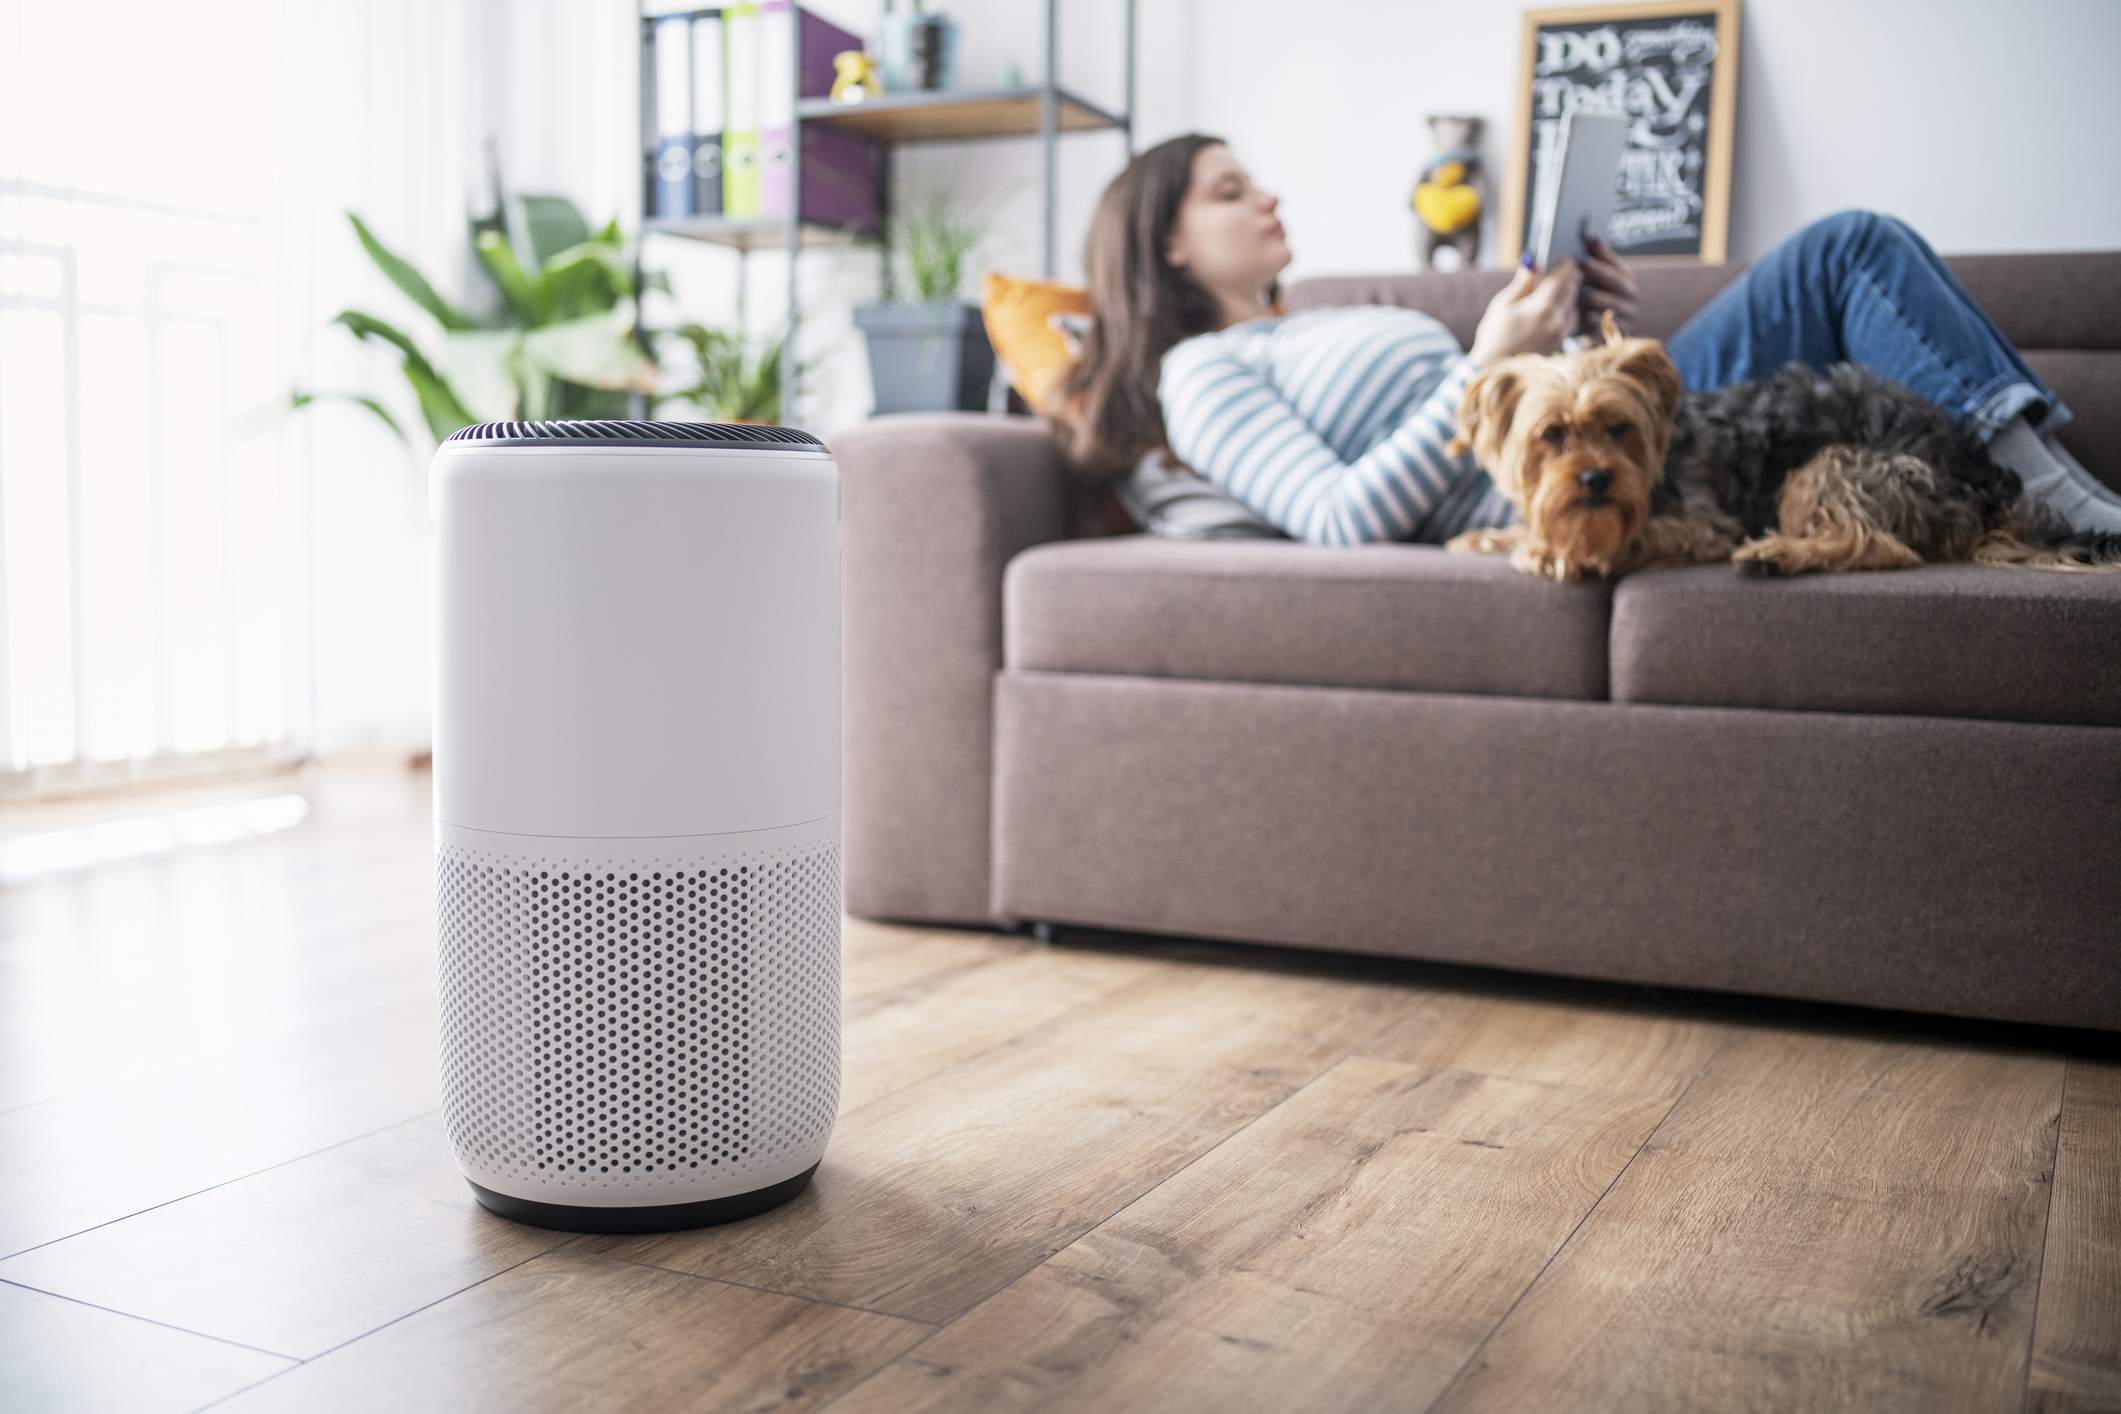 Three of the Best Home Air Purifiers for Cleaner, Healthier Air